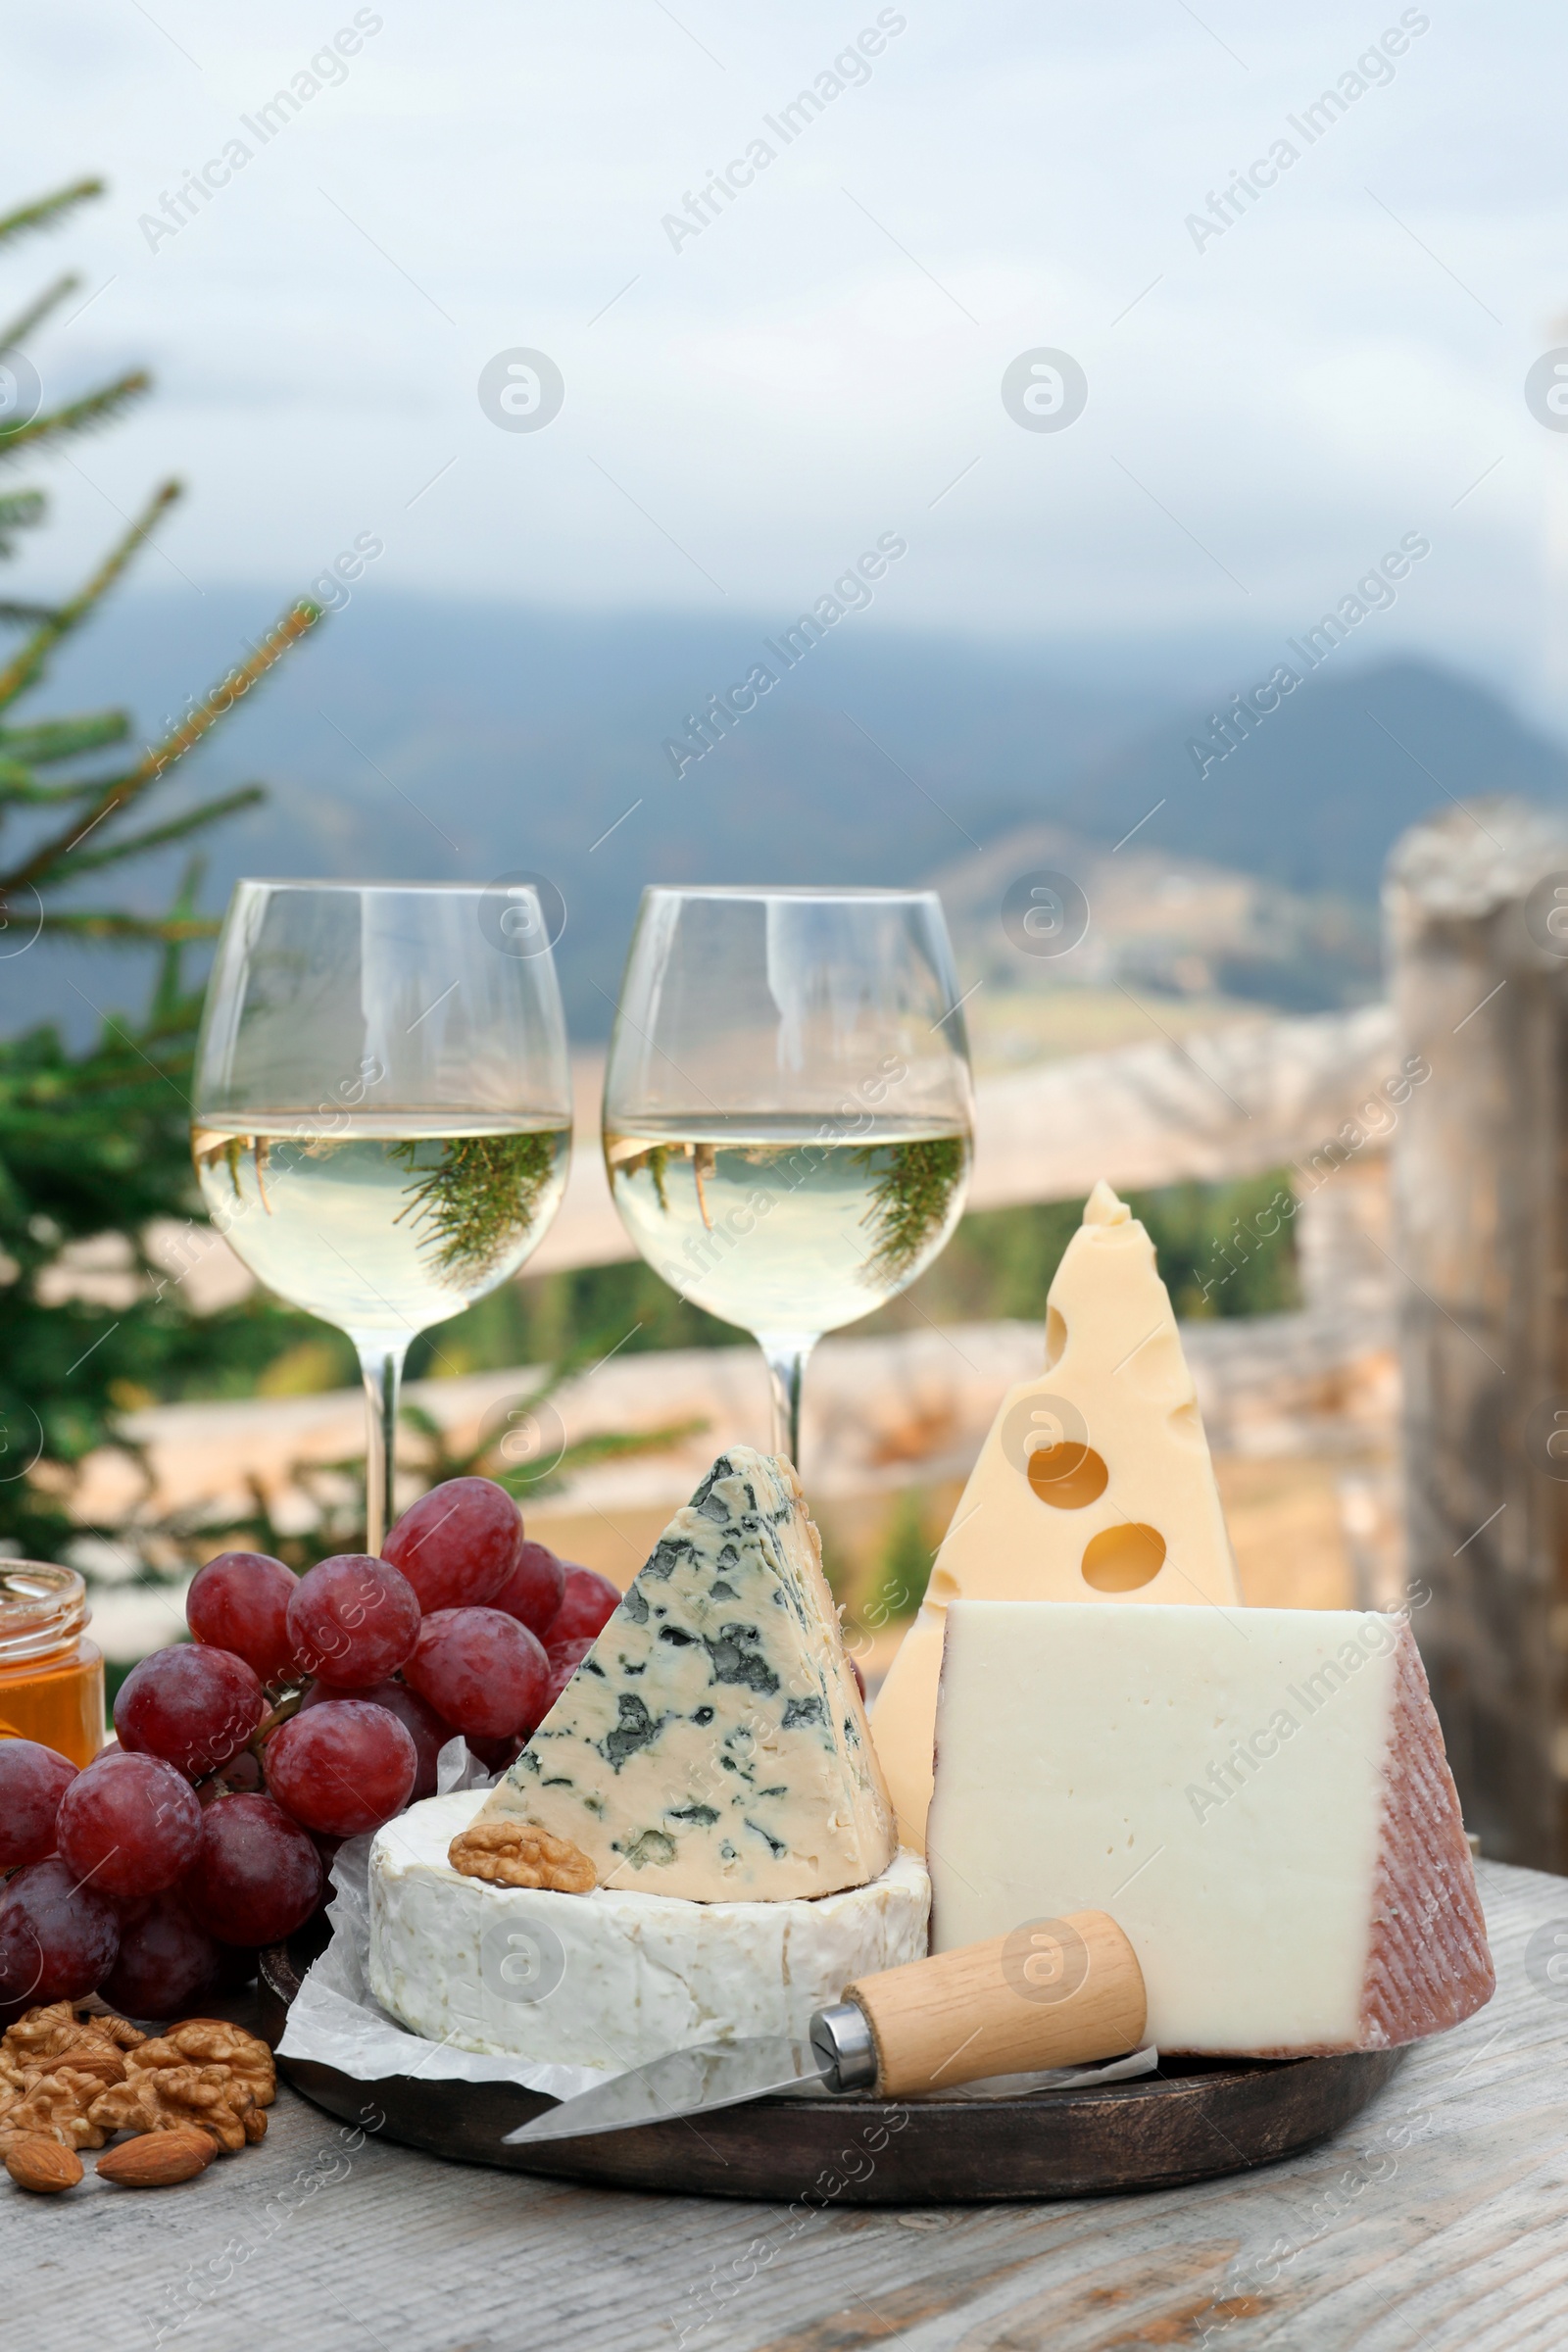 Photo of Different types of delicious cheeses, snacks and wine on wooden table against mountain landscape